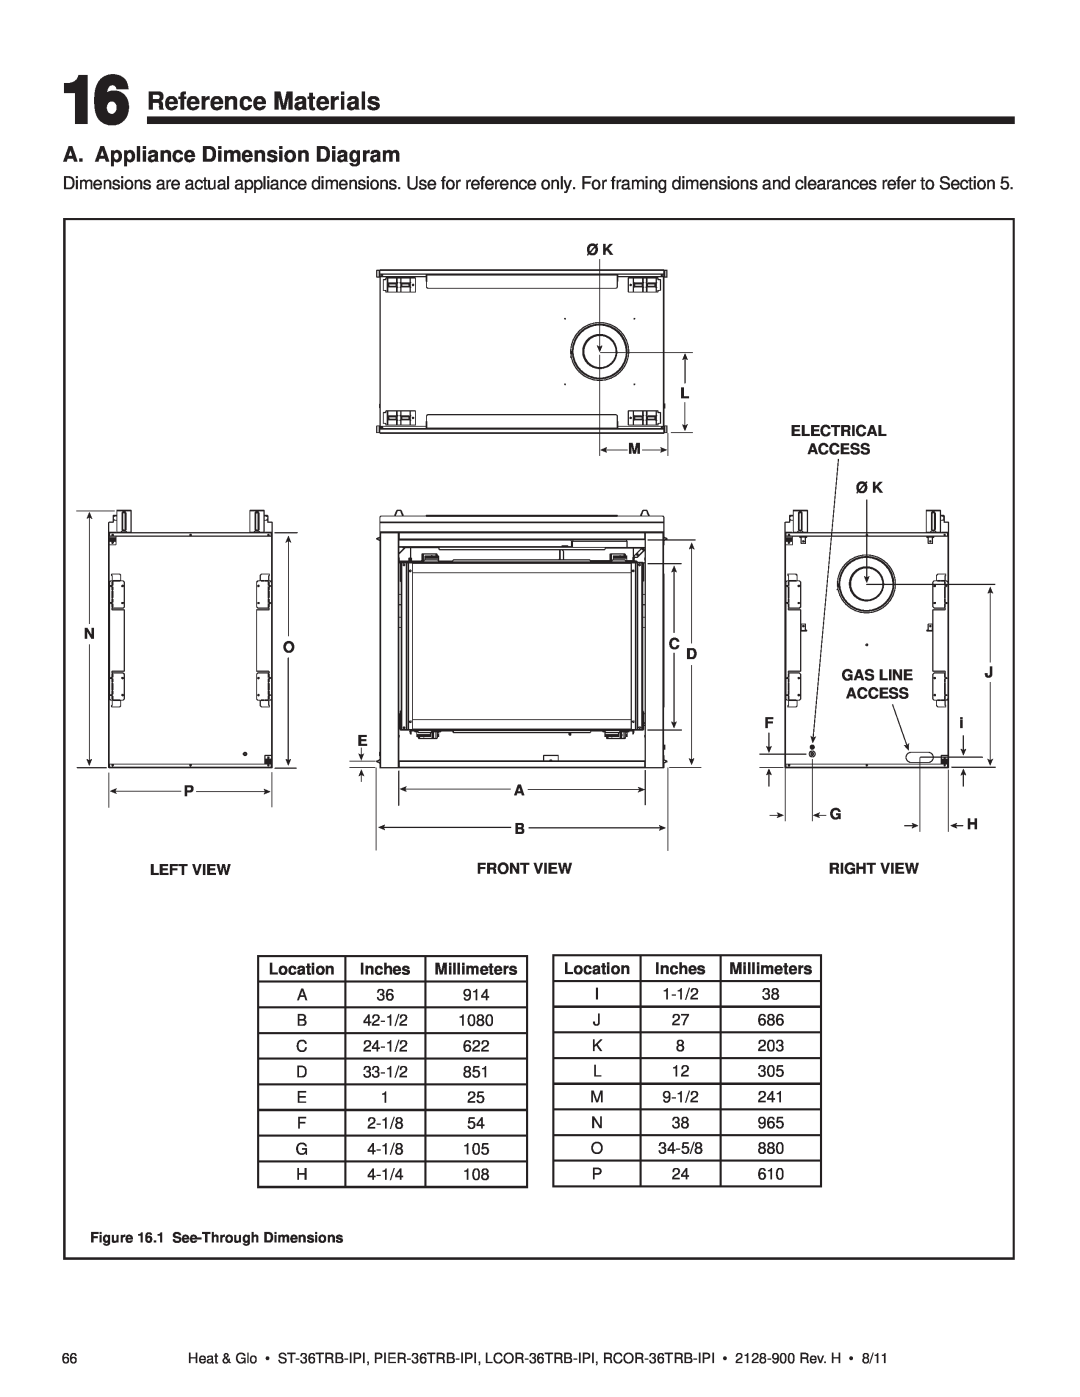 Heat & Glo LifeStyle ST-36TRB-IPI owner manual Reference Materials, A. Appliance Dimension Diagram 